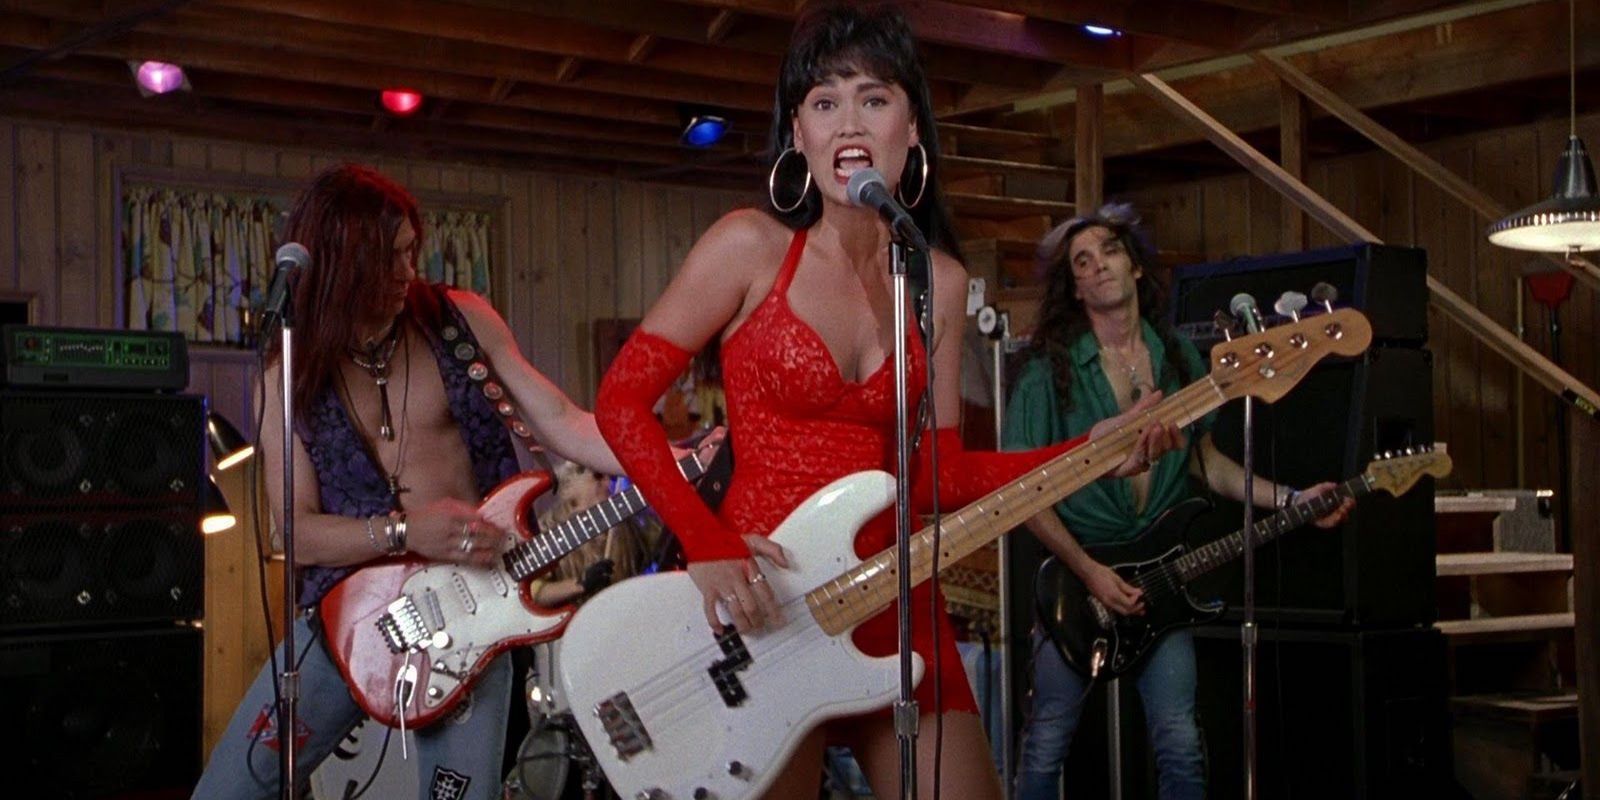 Cassandra shreds on bass while singing &quot;Ballroom Blitz&quot; with Crucial Taunt in Wayne's World.